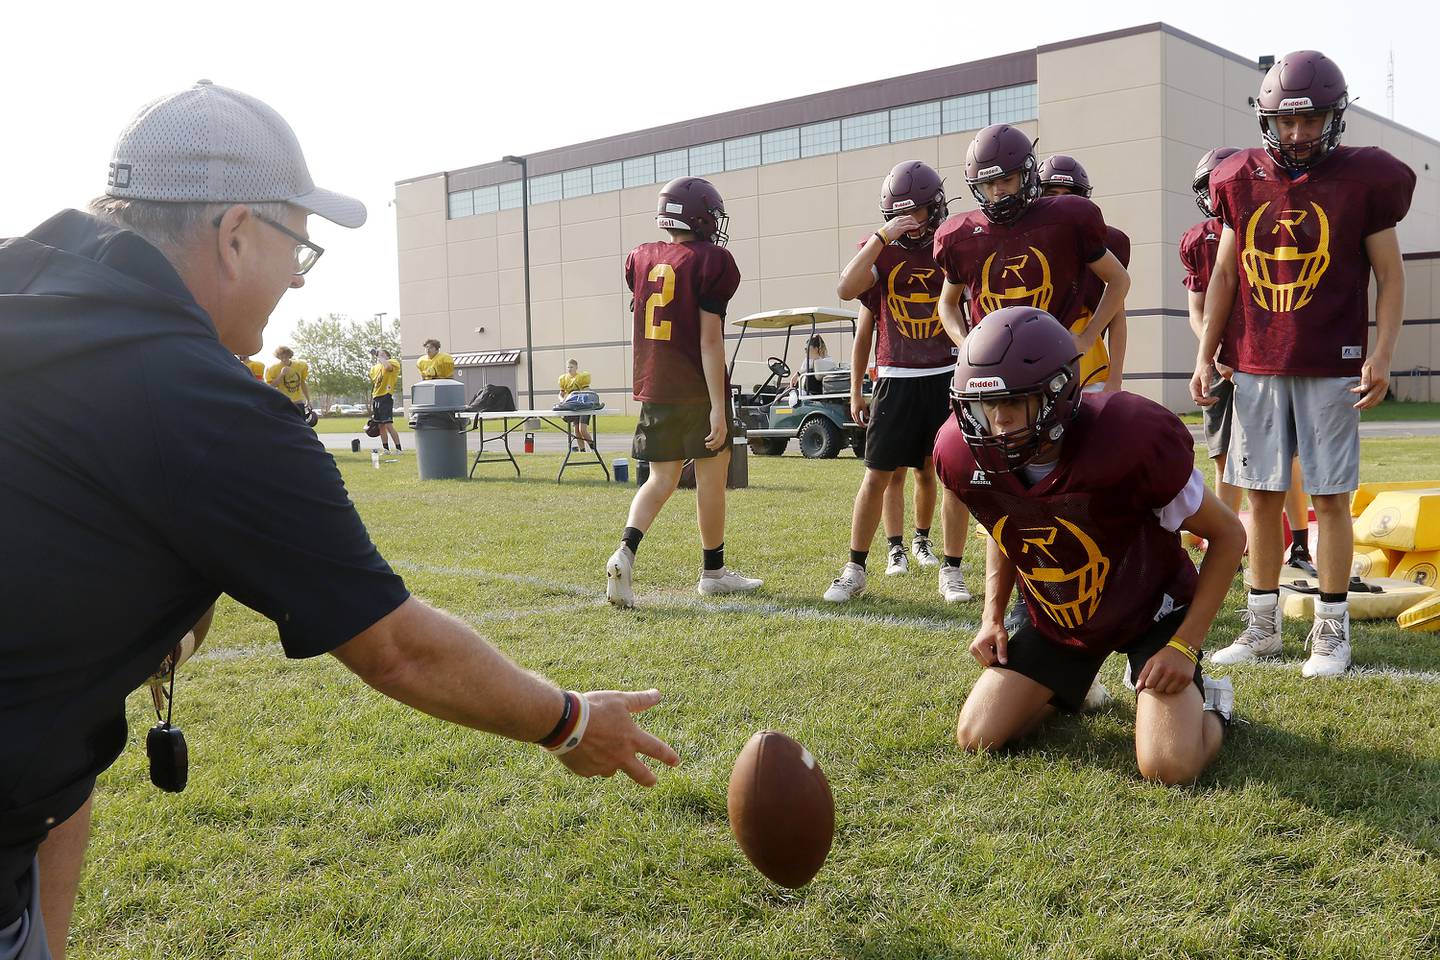 Coach Mike Noll, left, gently tosses the ball on the ground for Stephen Tower to smother during practice with the varsity football team at Richmond-Burton High School on Wednesday, July 14, 2021 in Richmond.